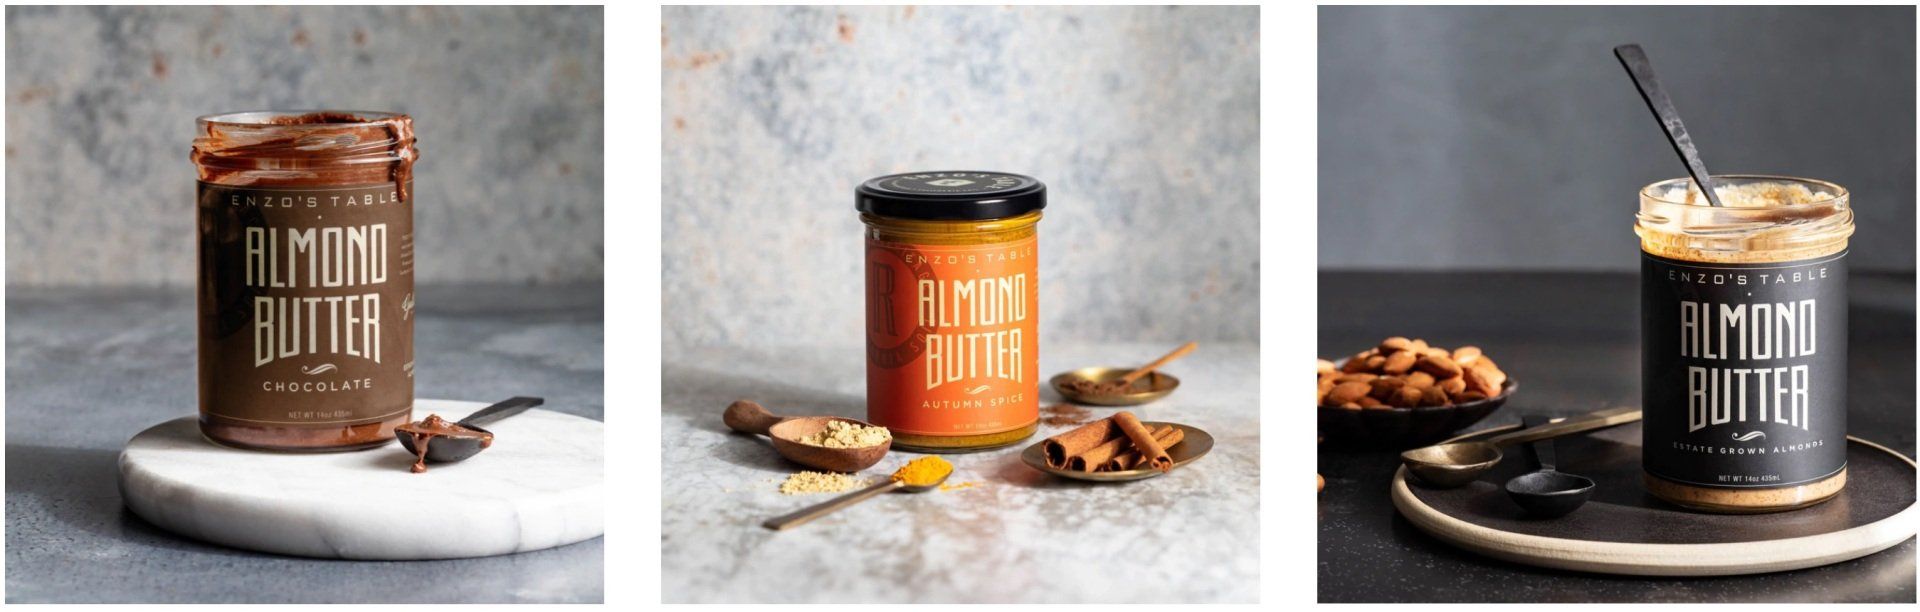 almond butter jars with spoons